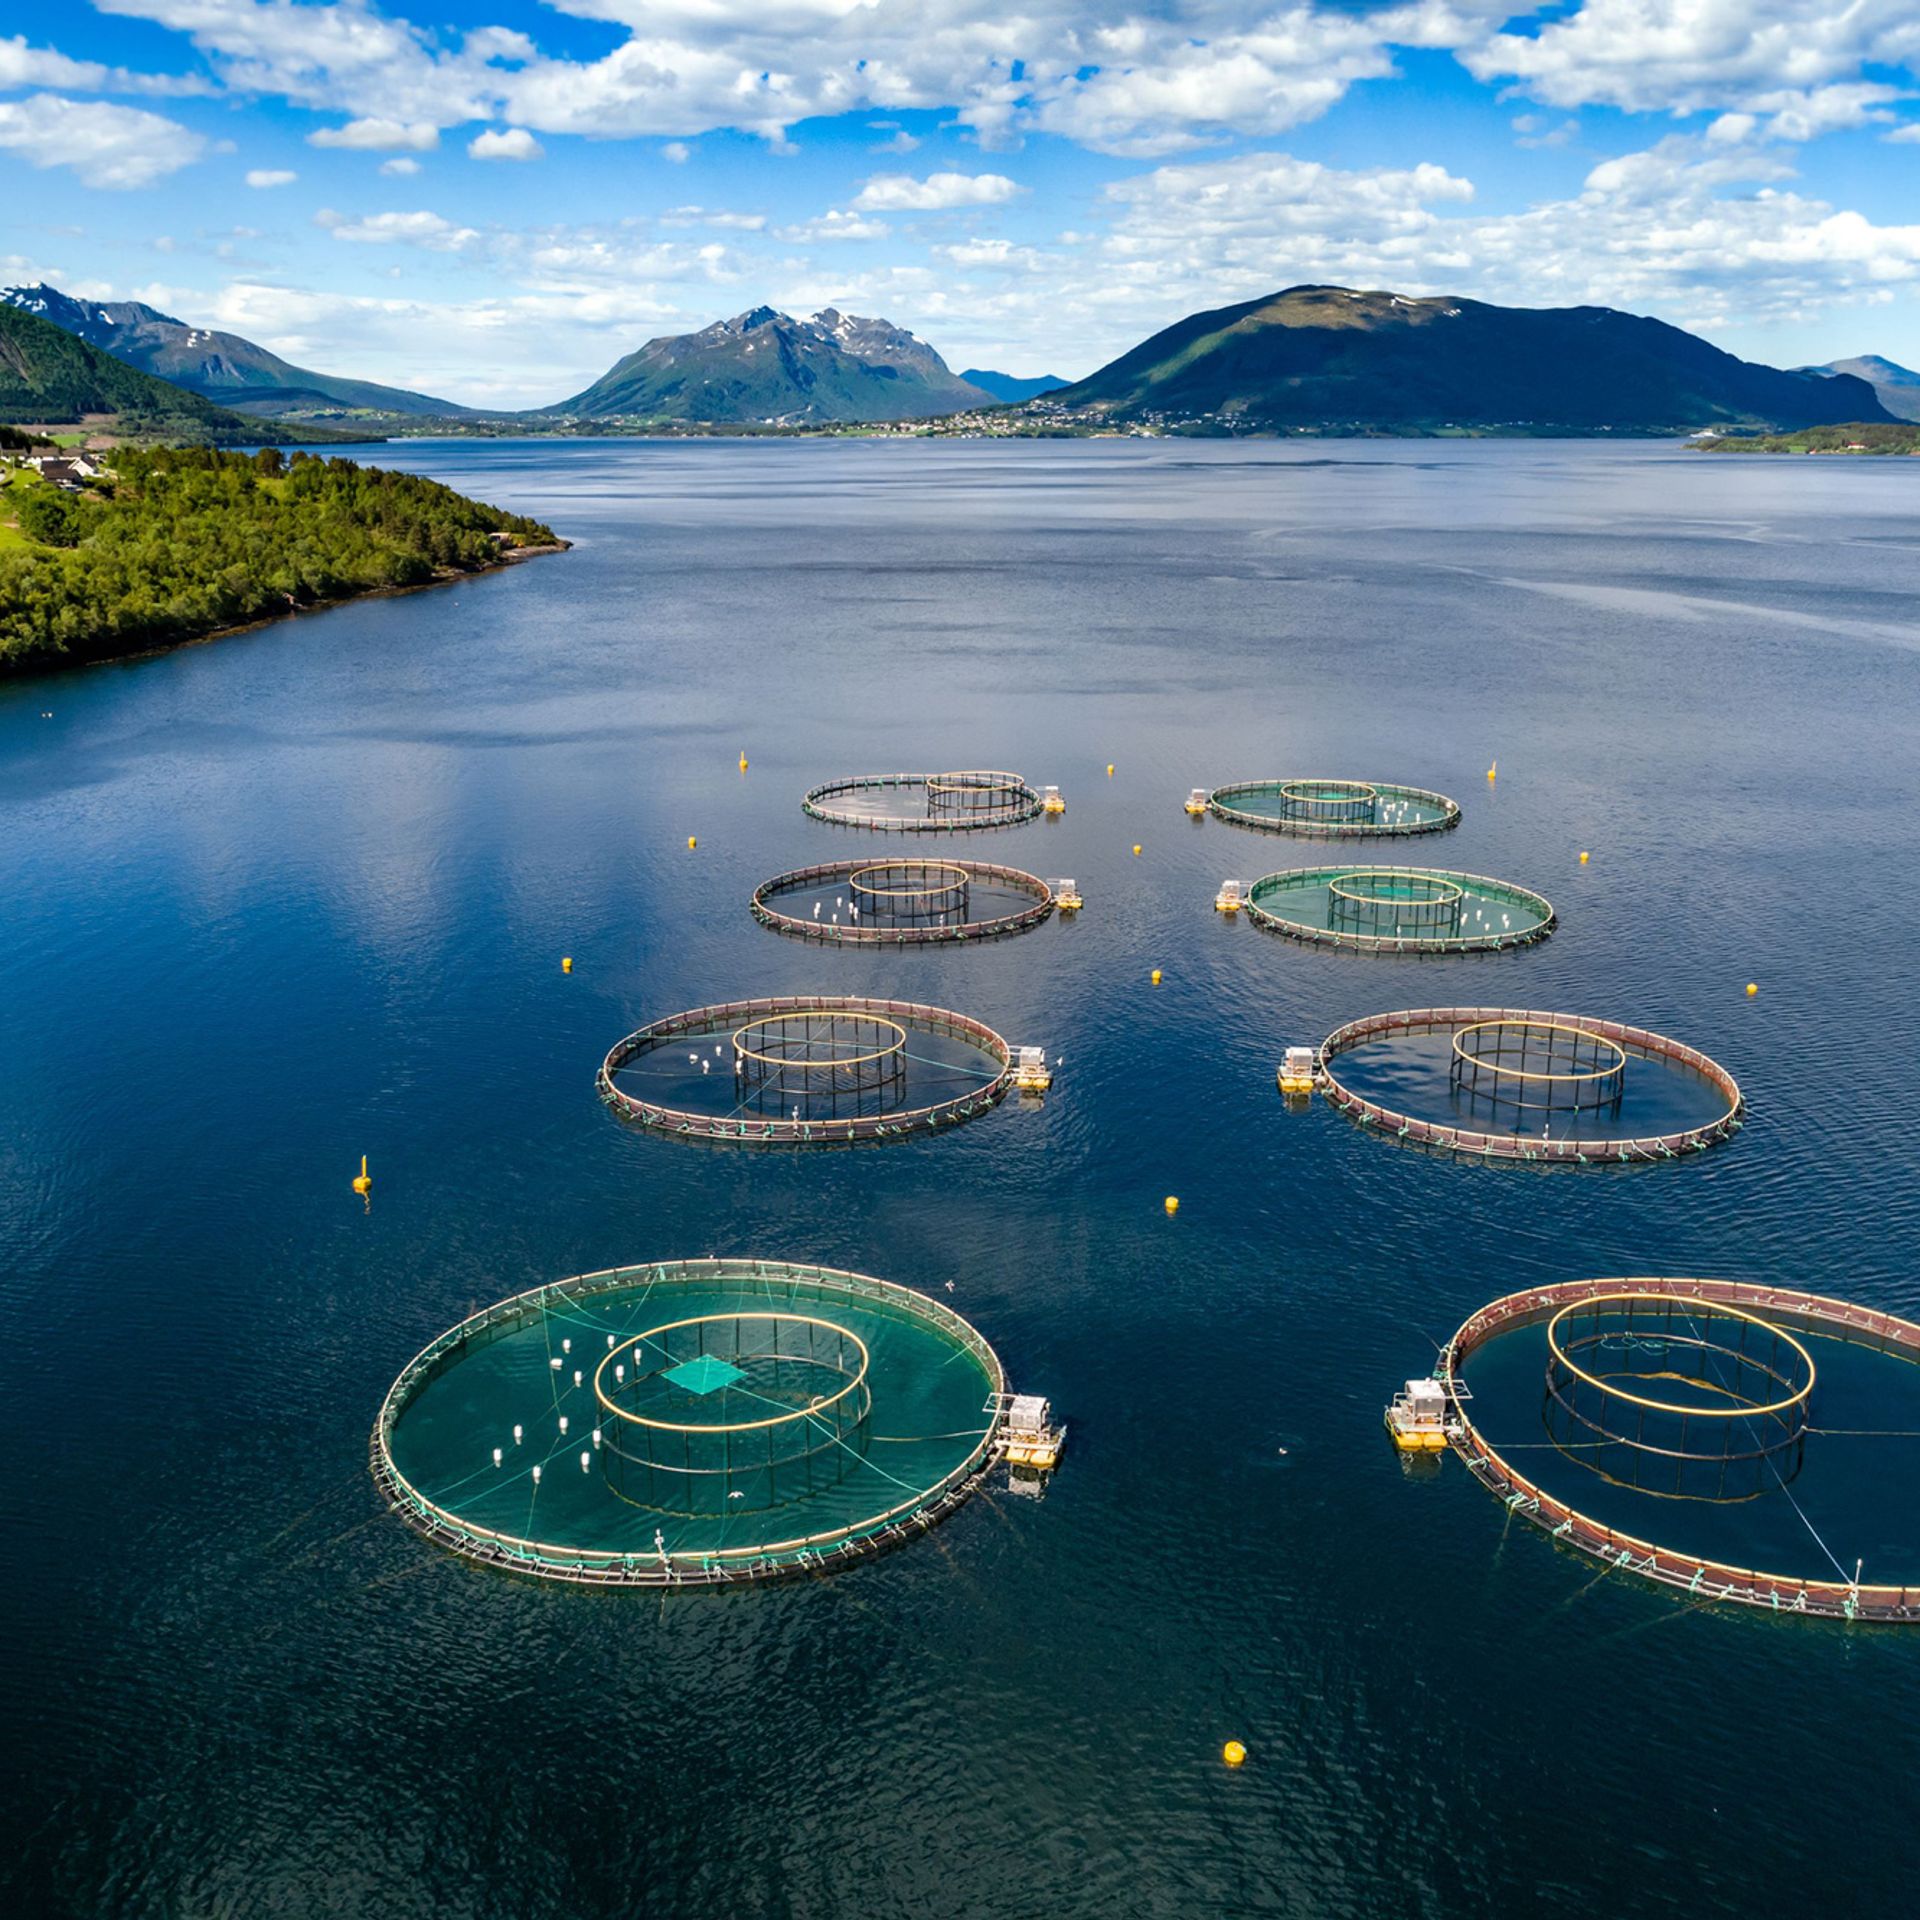 Image of a Norwegian aquaculture farm from above